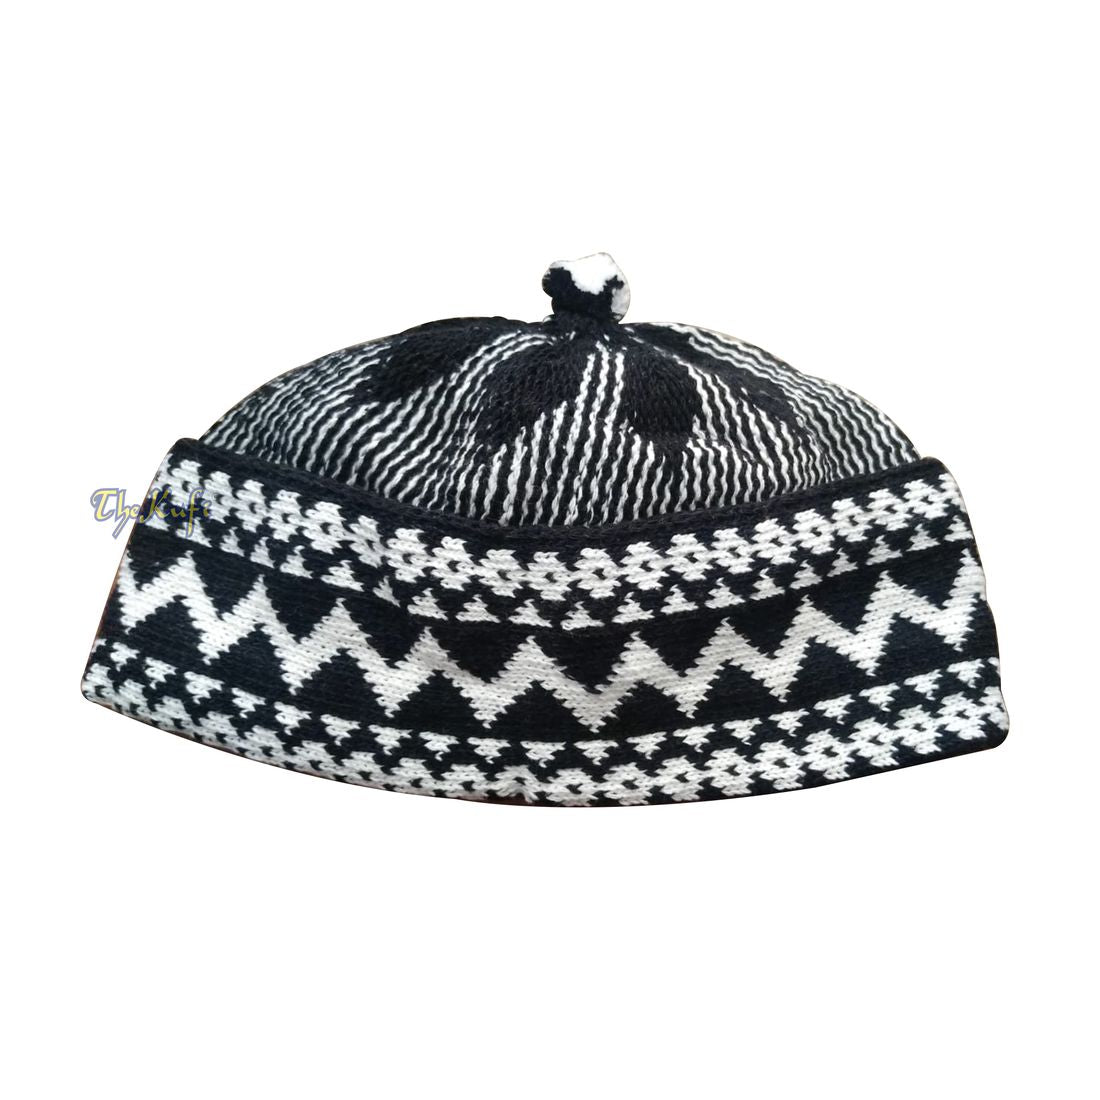 Black Cotton Blend Zigzag Beanie Kufi Hat with Ball on Top